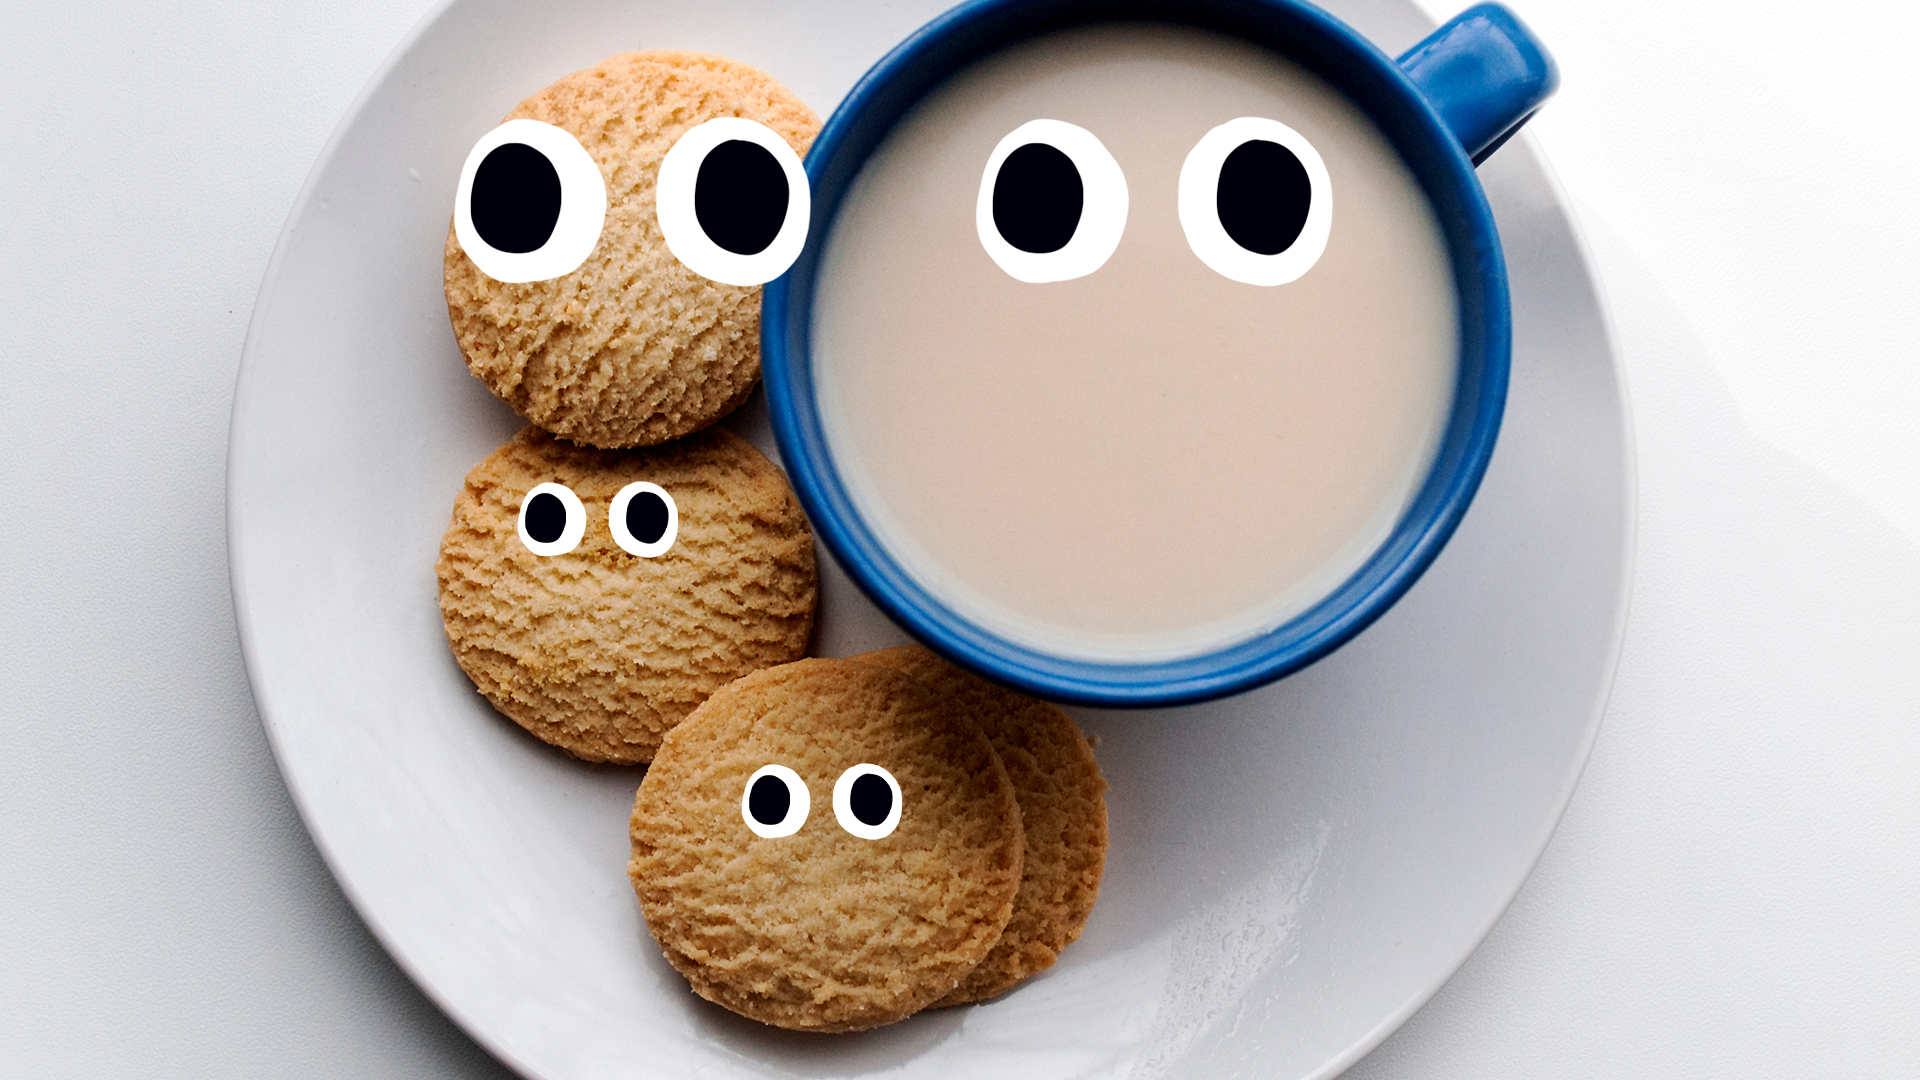 Biscuits and tea with eyes